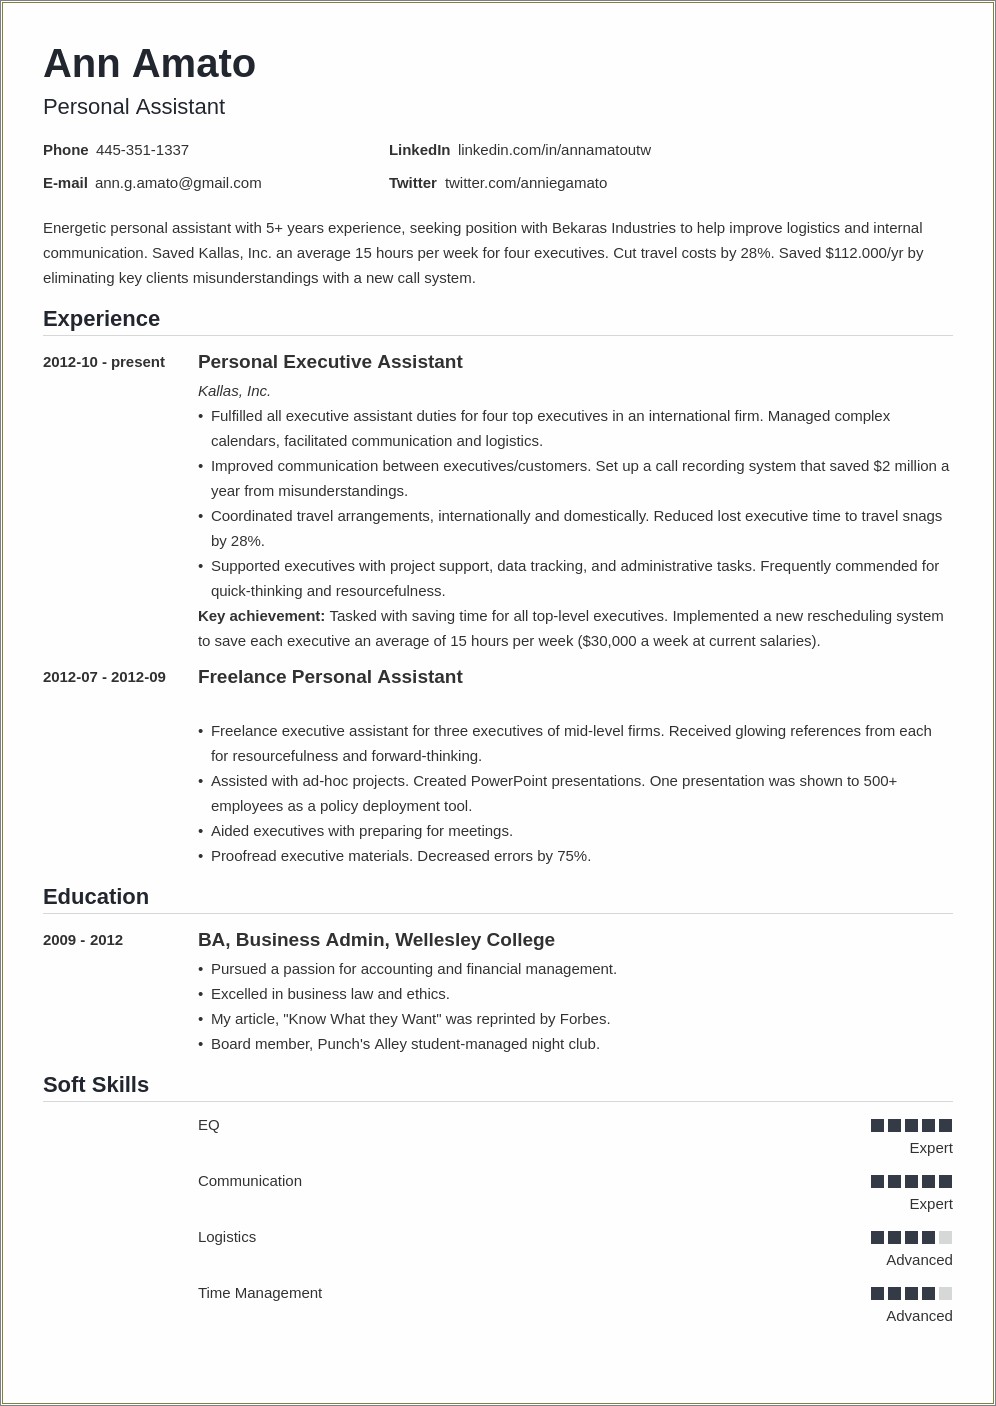 10 Years Of Experience In It Resume